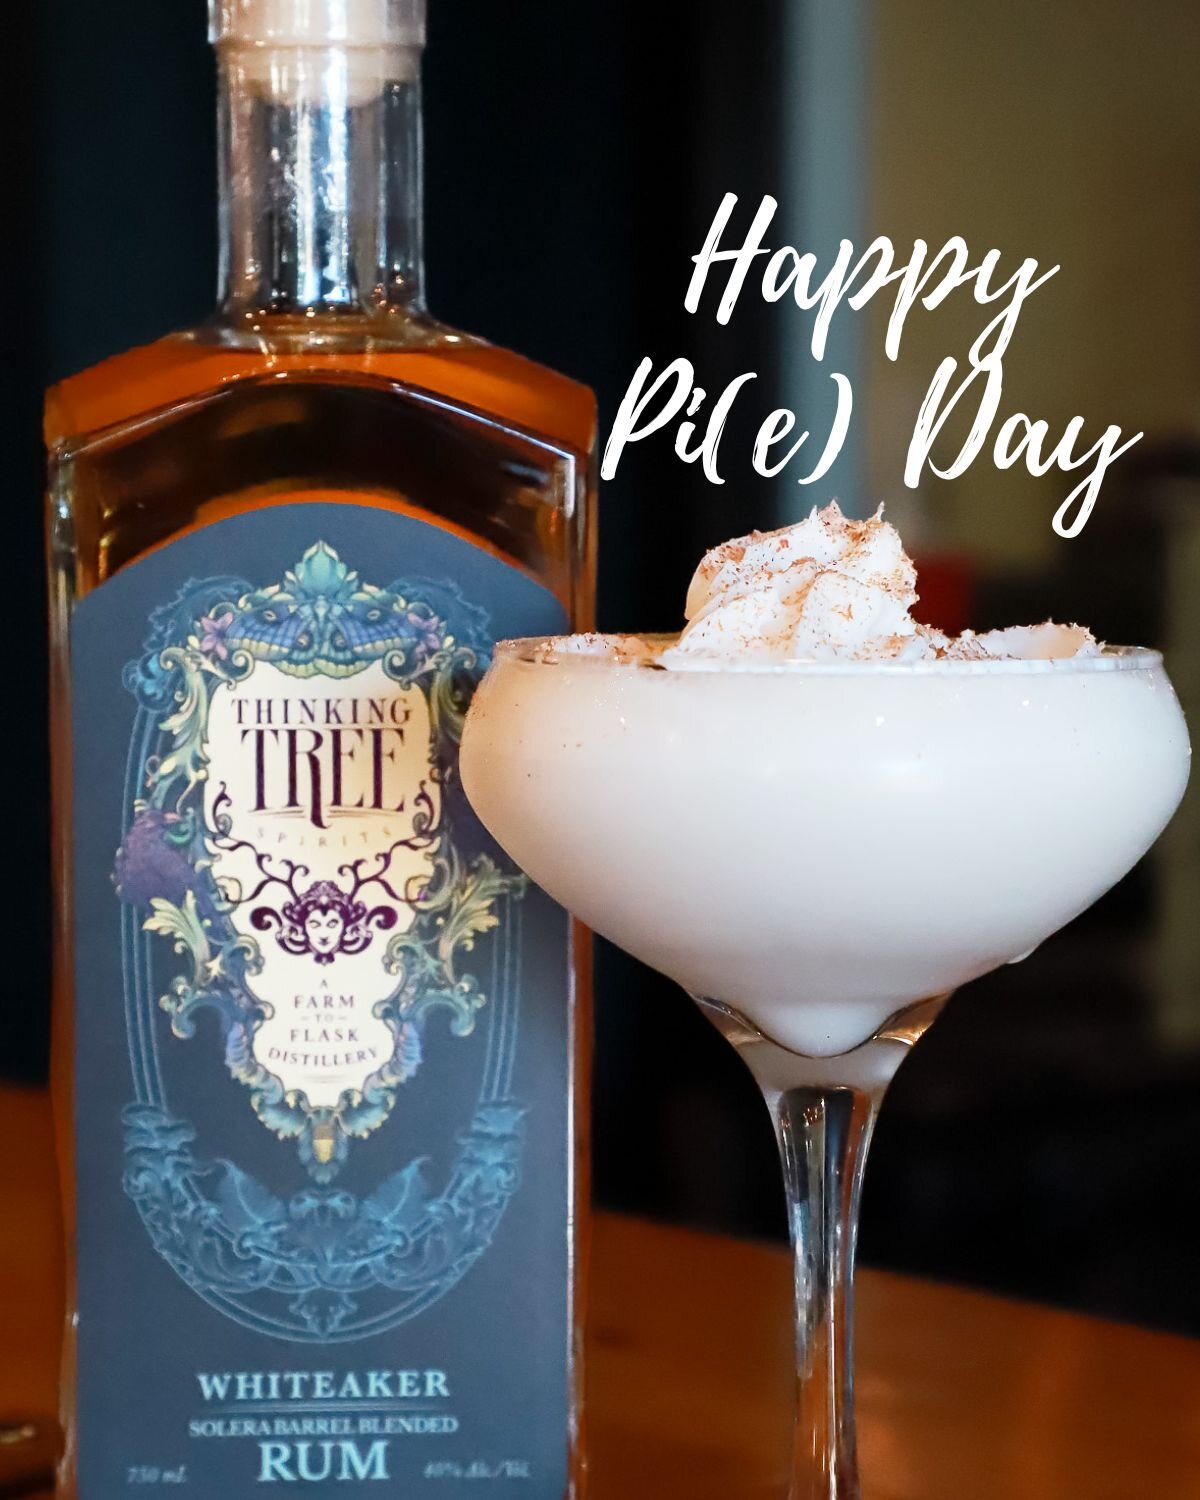 Happy National Pi Day 🥧✨! Celebrate by trying our drink of the week, The Boston Cream Pie, featuring our Whiteaker Rum. Cheers to the sweet side of &pi;! #thinkingtreespirits #NationalPiDay